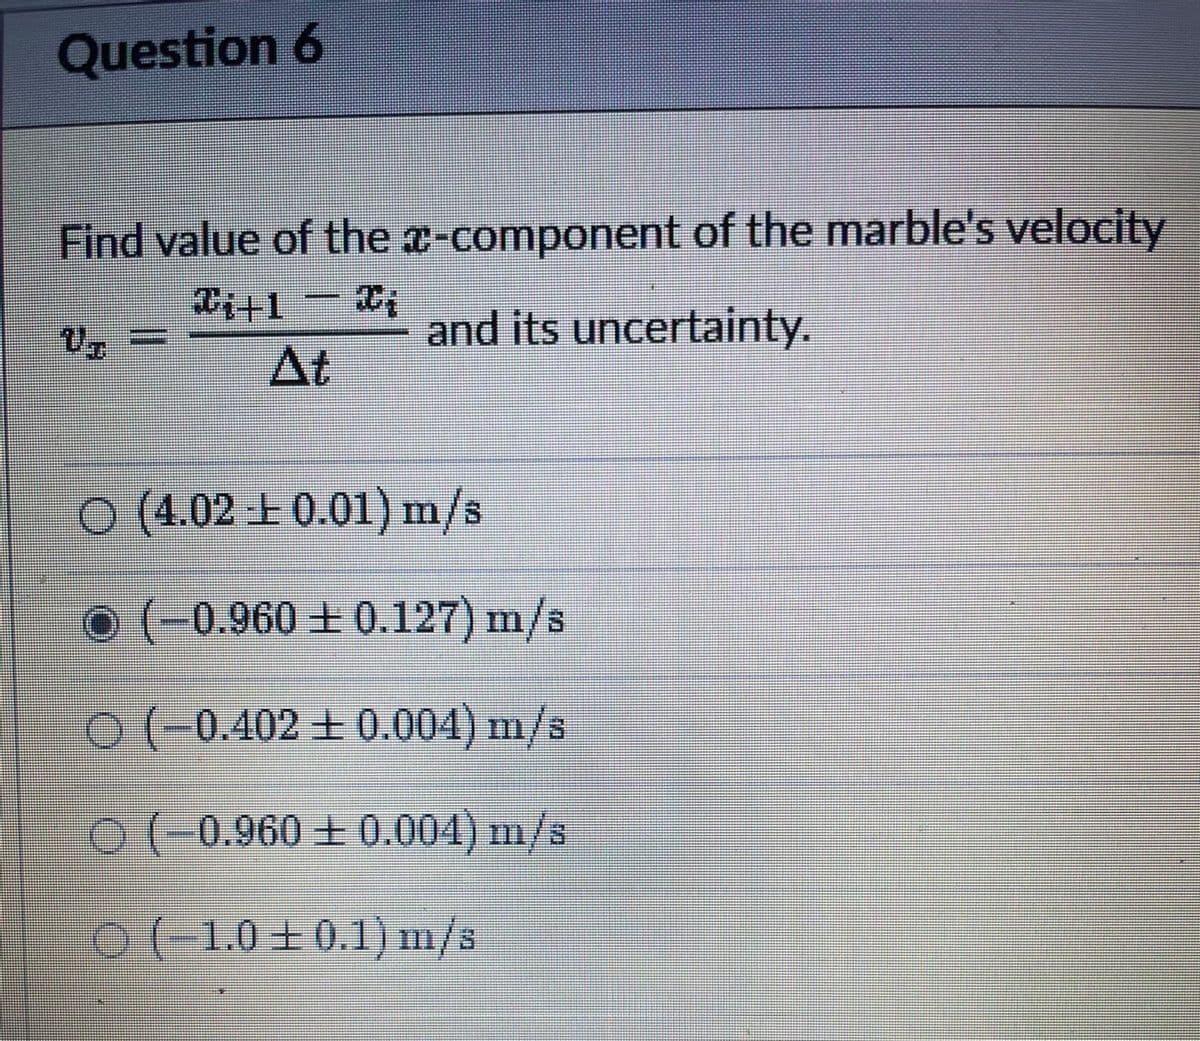 Question 6
Find value of the x-component of the marble's velocity
-
and its uncertainty.
At
O (4.02 E 0.01) m/s
o (-0.960 + 0.127) m/s
0 (-0.402 ± 0.004) m/s
O(-0.960+ 0.004) m/s
0(-1.0+0.1) m/s
